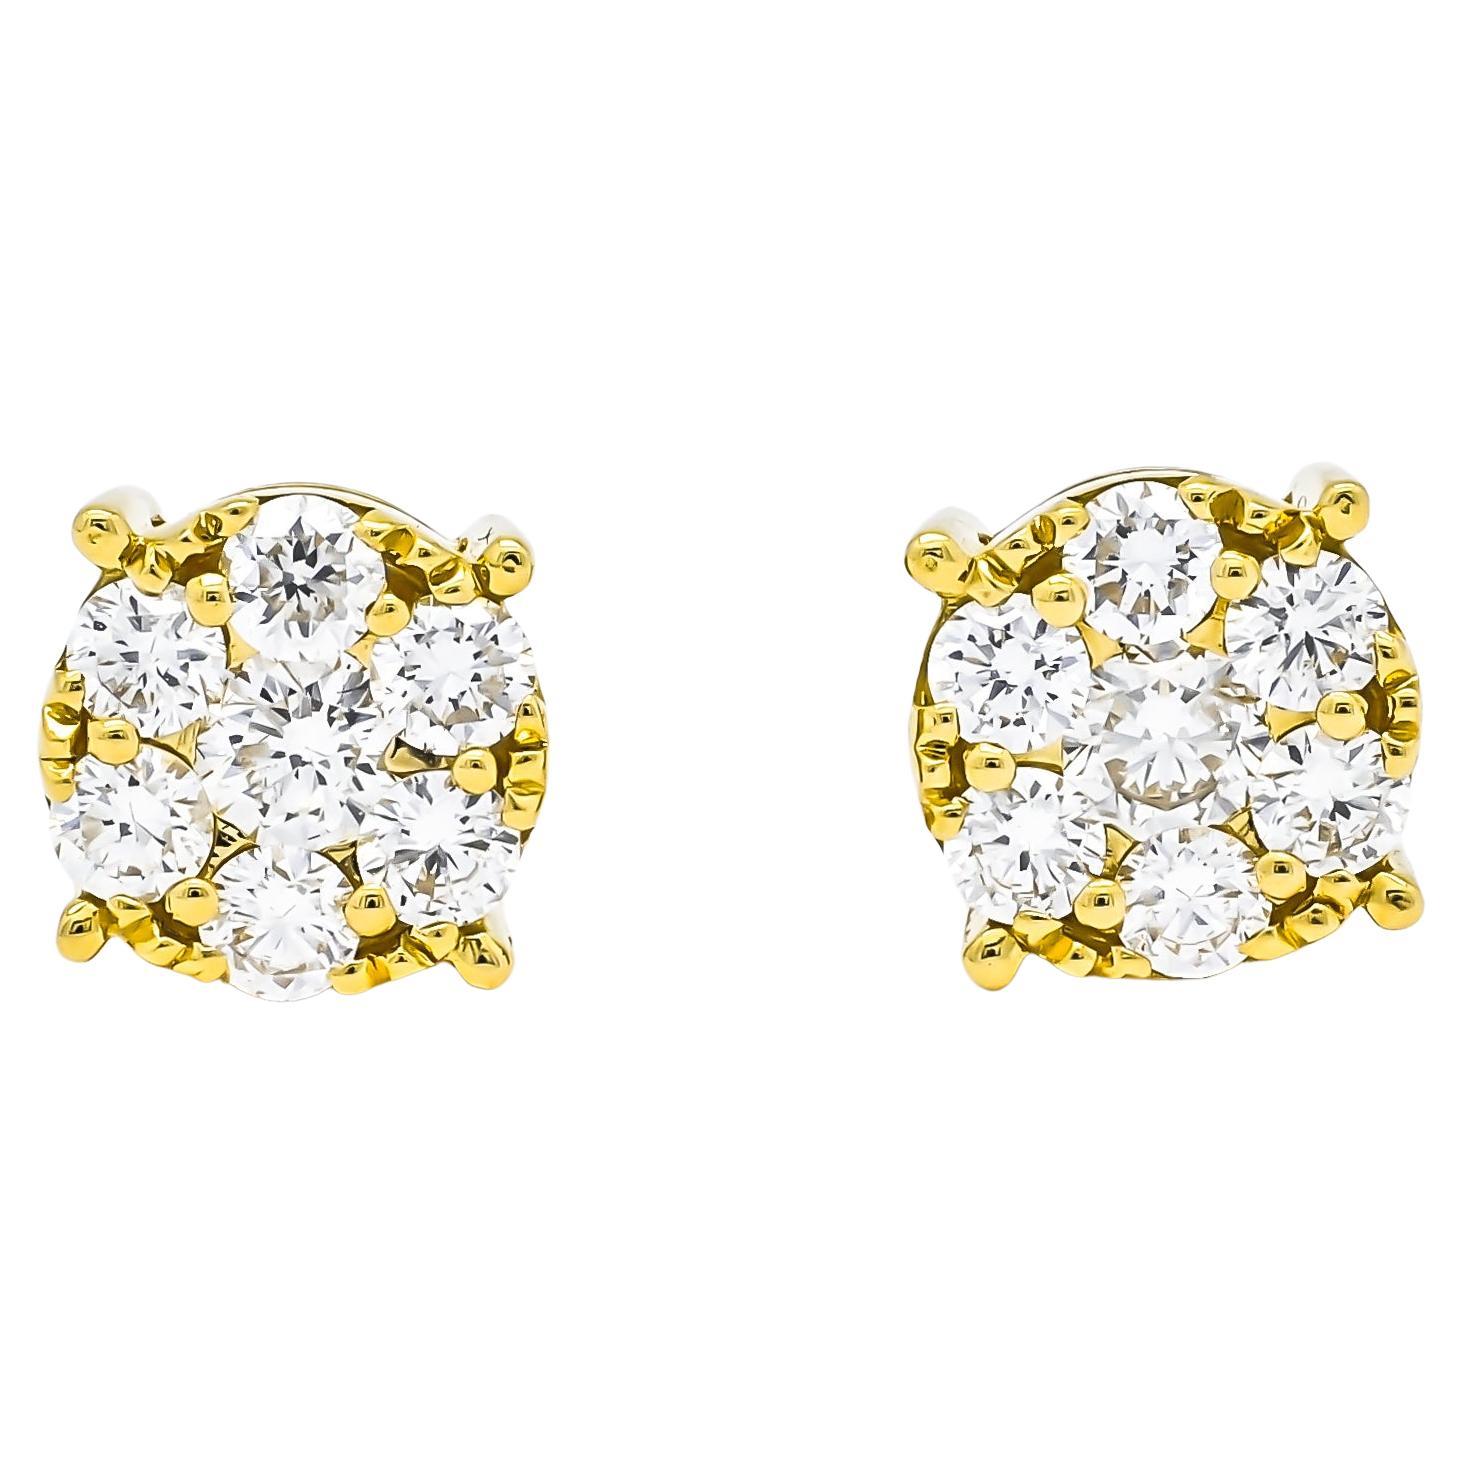 18KT Gold 4 Prong Classic Cluster Solitaire Natural Diamonds Earrings E064014-YG For Sale